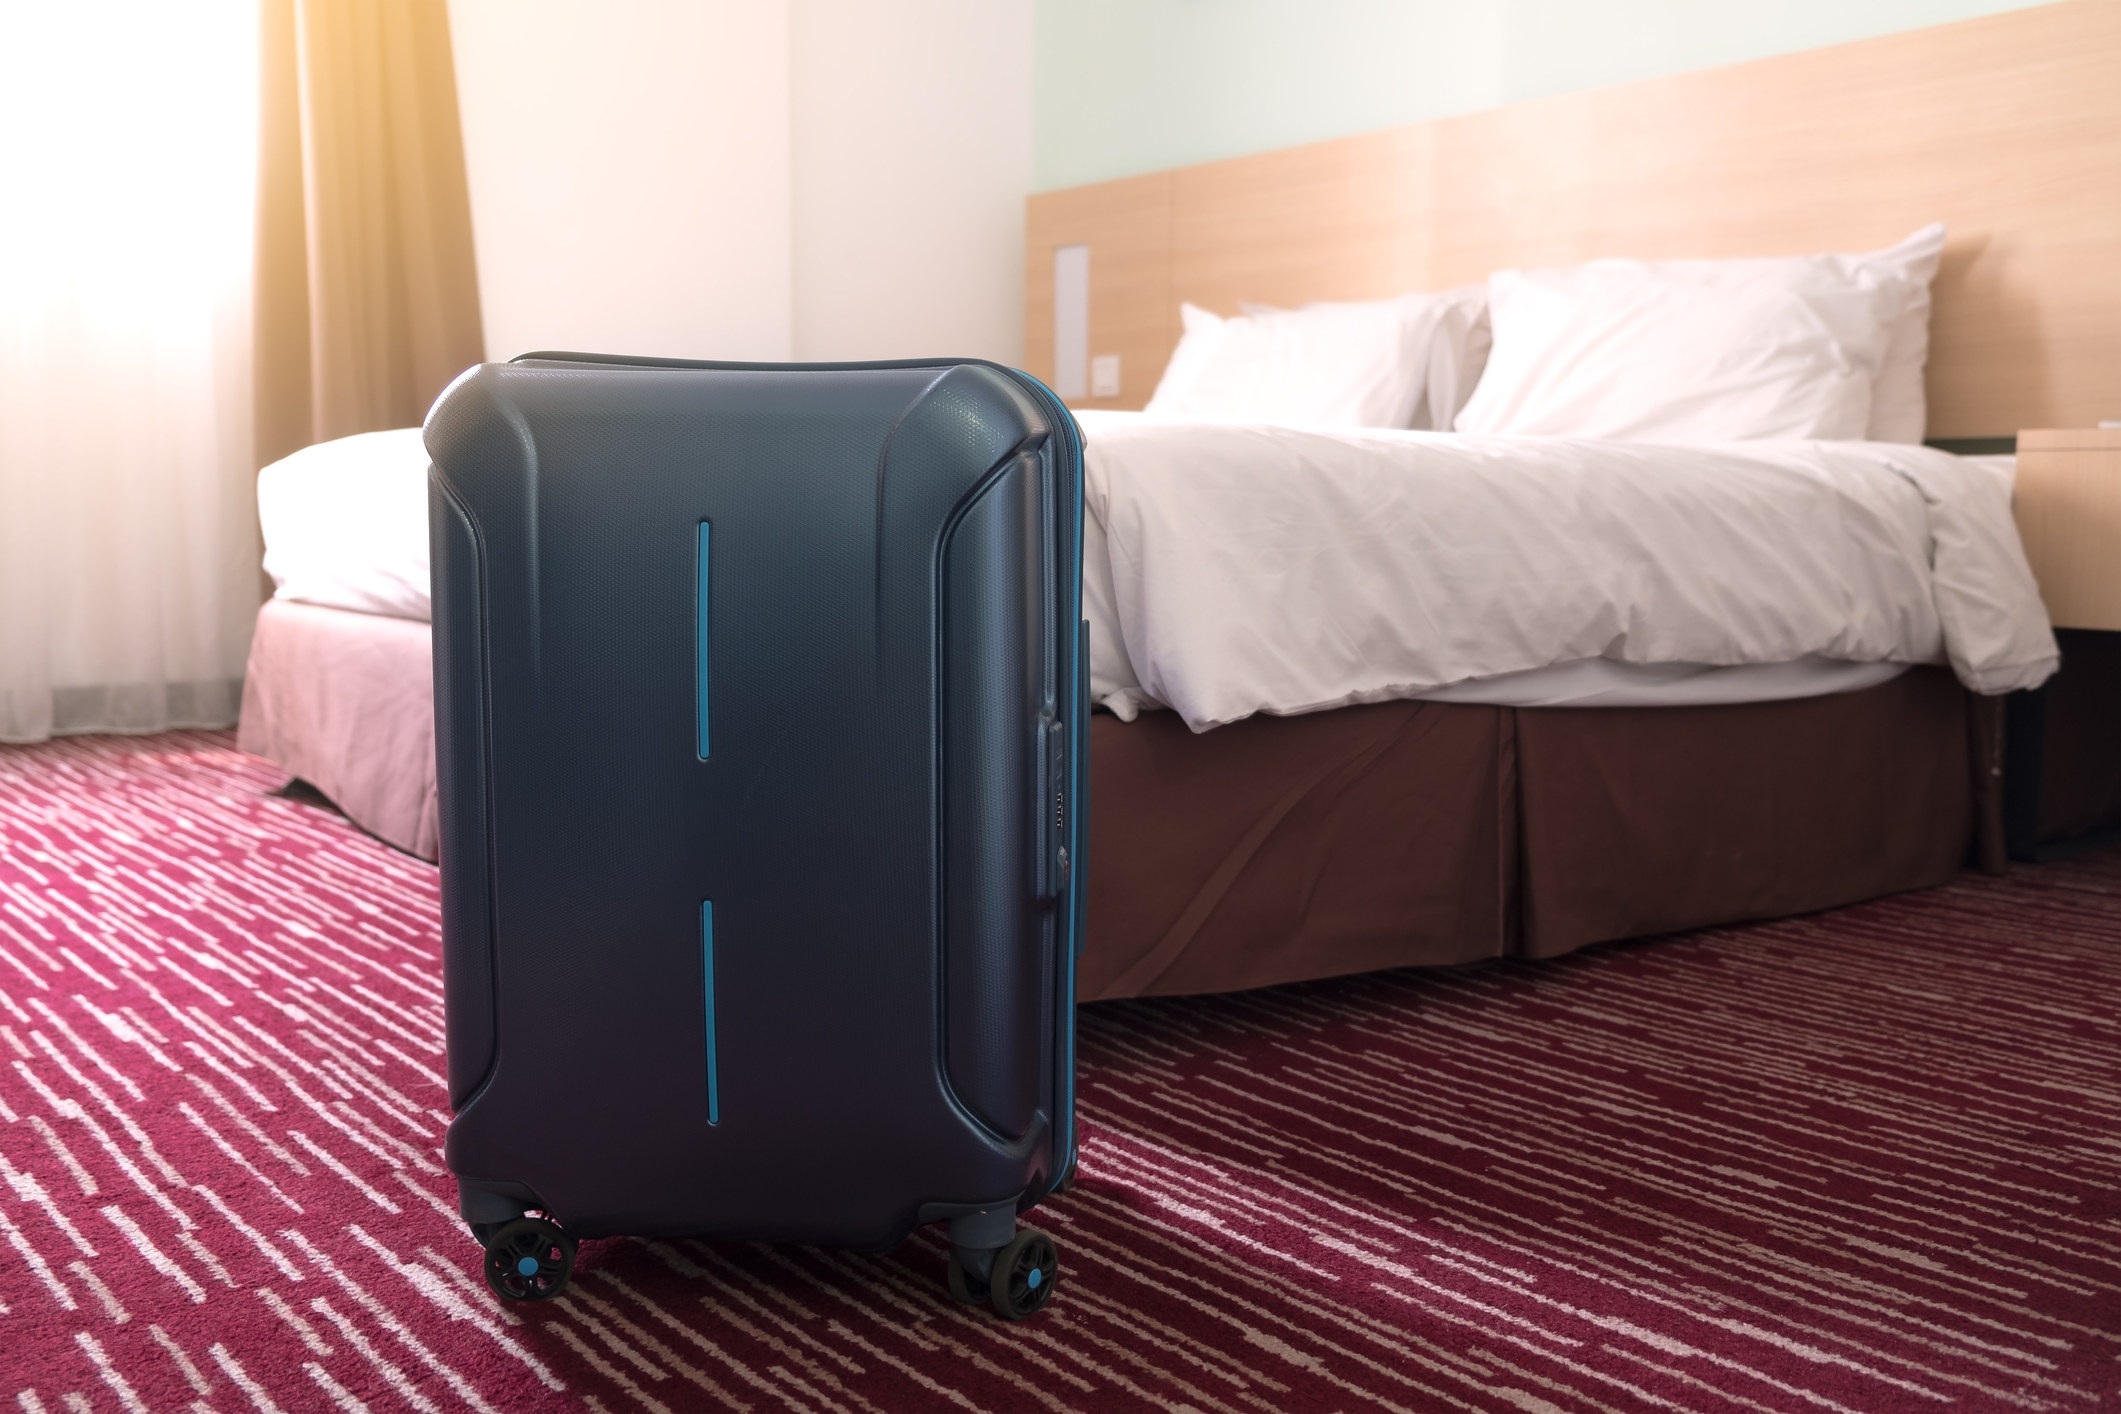 A suitcase in a hotel room